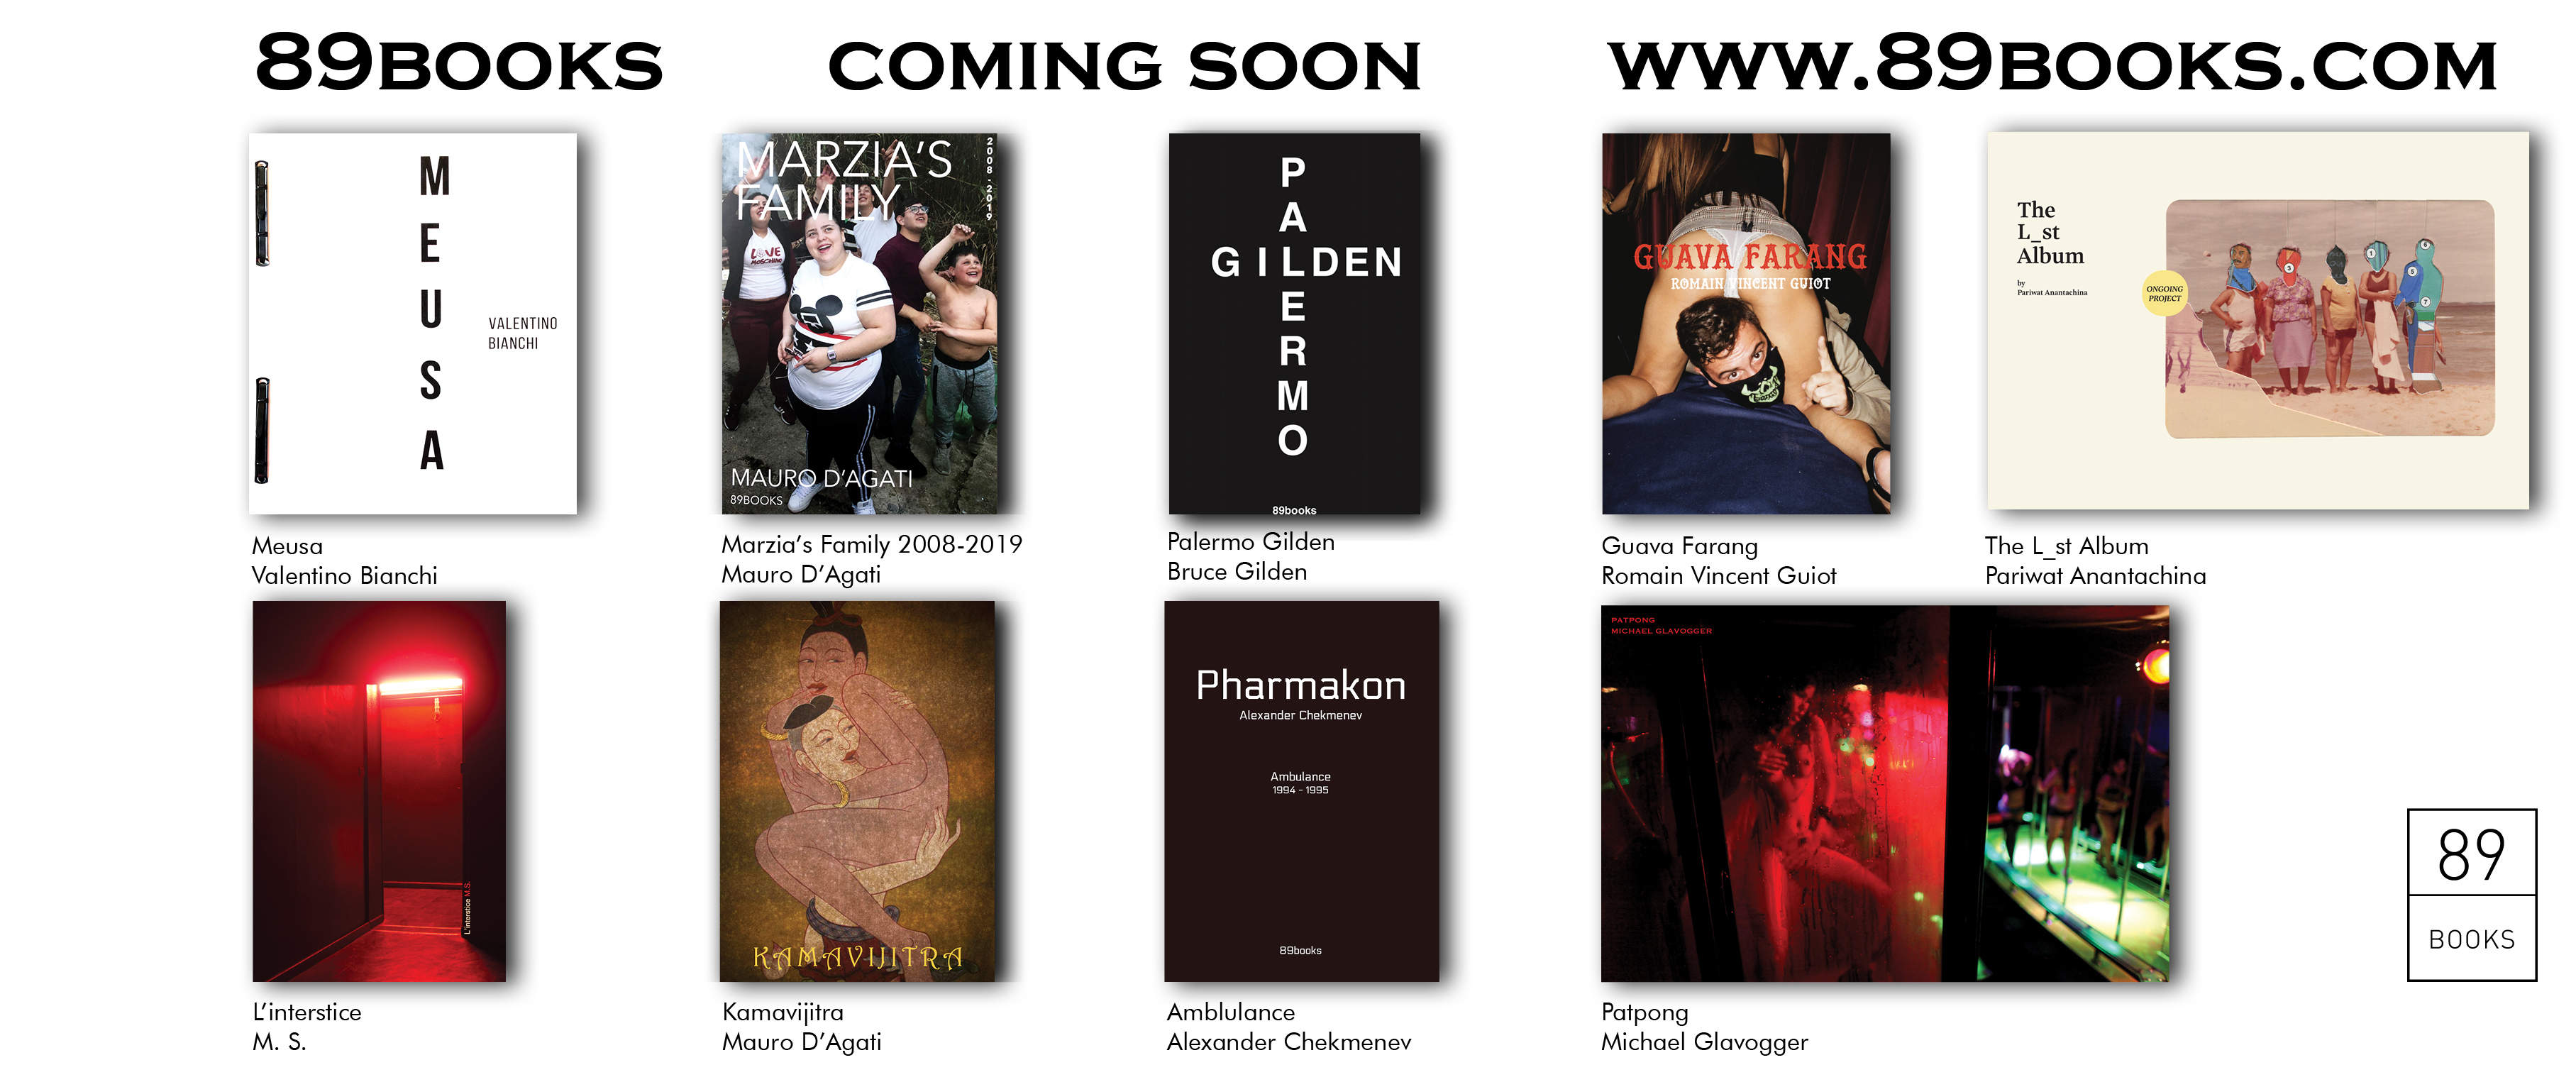 New publications coming soon!